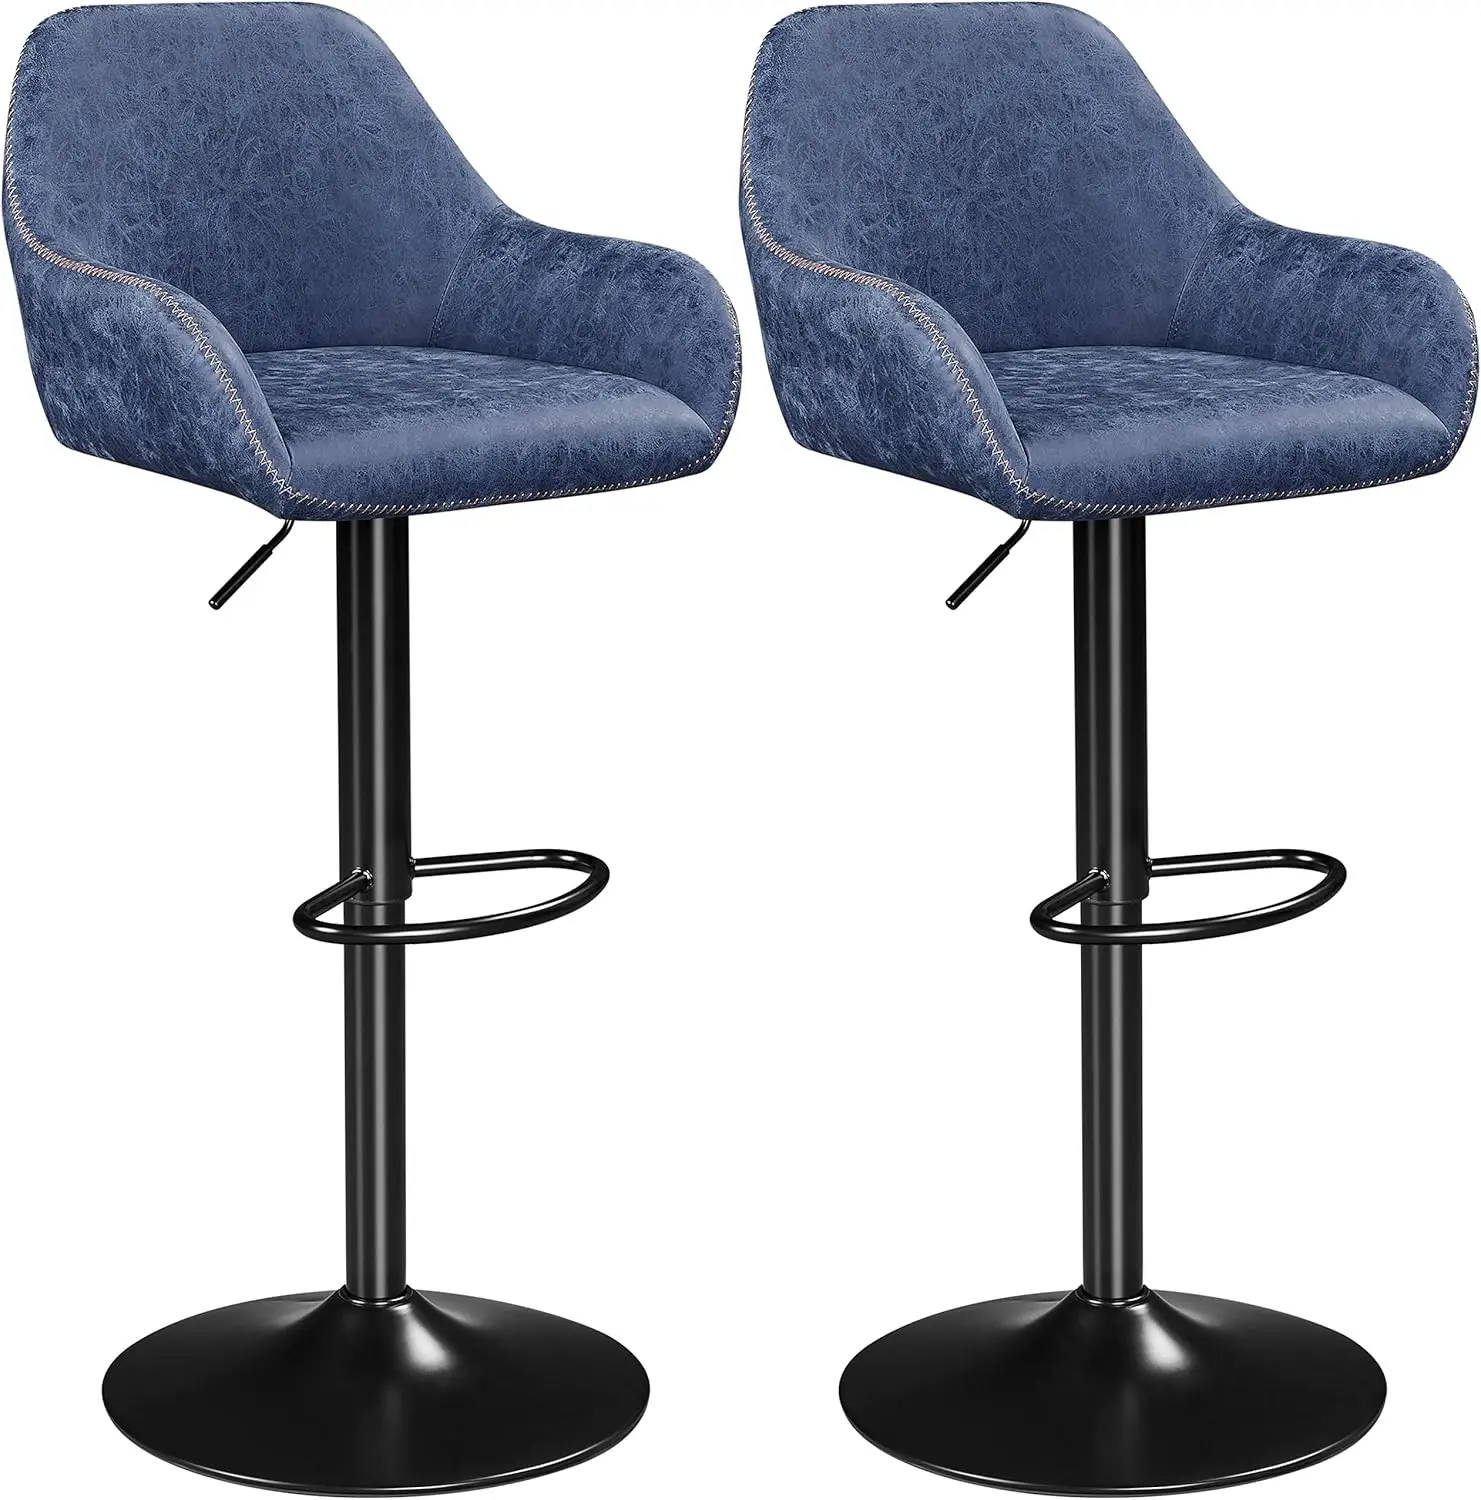 

Vintage Bar Stools Set of 2 Modern Pub Kitchen Counter Height Barstools Vintage Swivel Leather Bar Chair, Blue(2pcs Package 1)